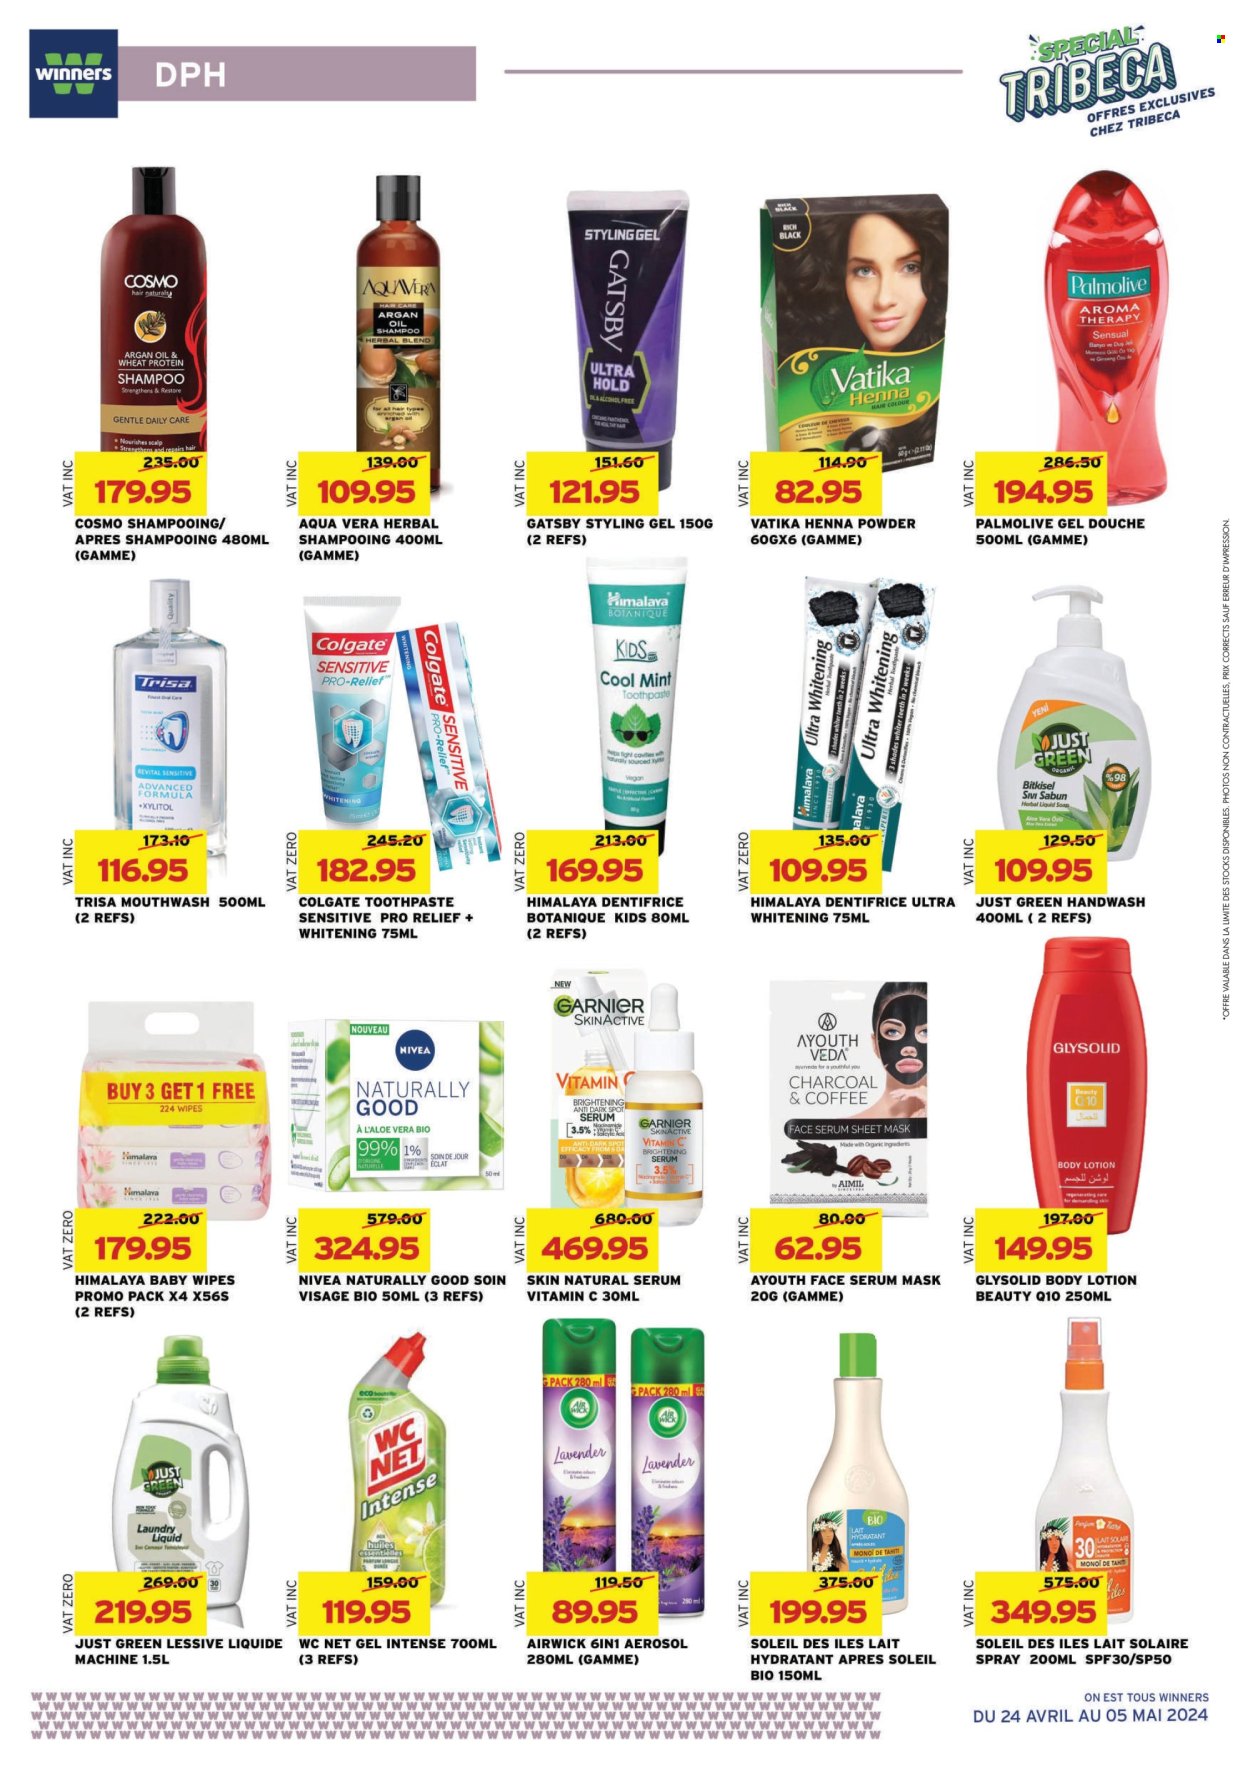 thumbnail - Winner's Catalogue - 24.04.2024 - 5.05.2024 - Sales products - wipes, baby wipes, Nivea, laundry detergent, shampoo, hand wash, Palmolive, hair products, toothpaste, mouthwash, brightening serum, serum, Niacinamide, hair color, styling gel, body lotion, eau de parfum, Eclat, Air Wick, ginseng, Colgate, Garnier. Page 16.